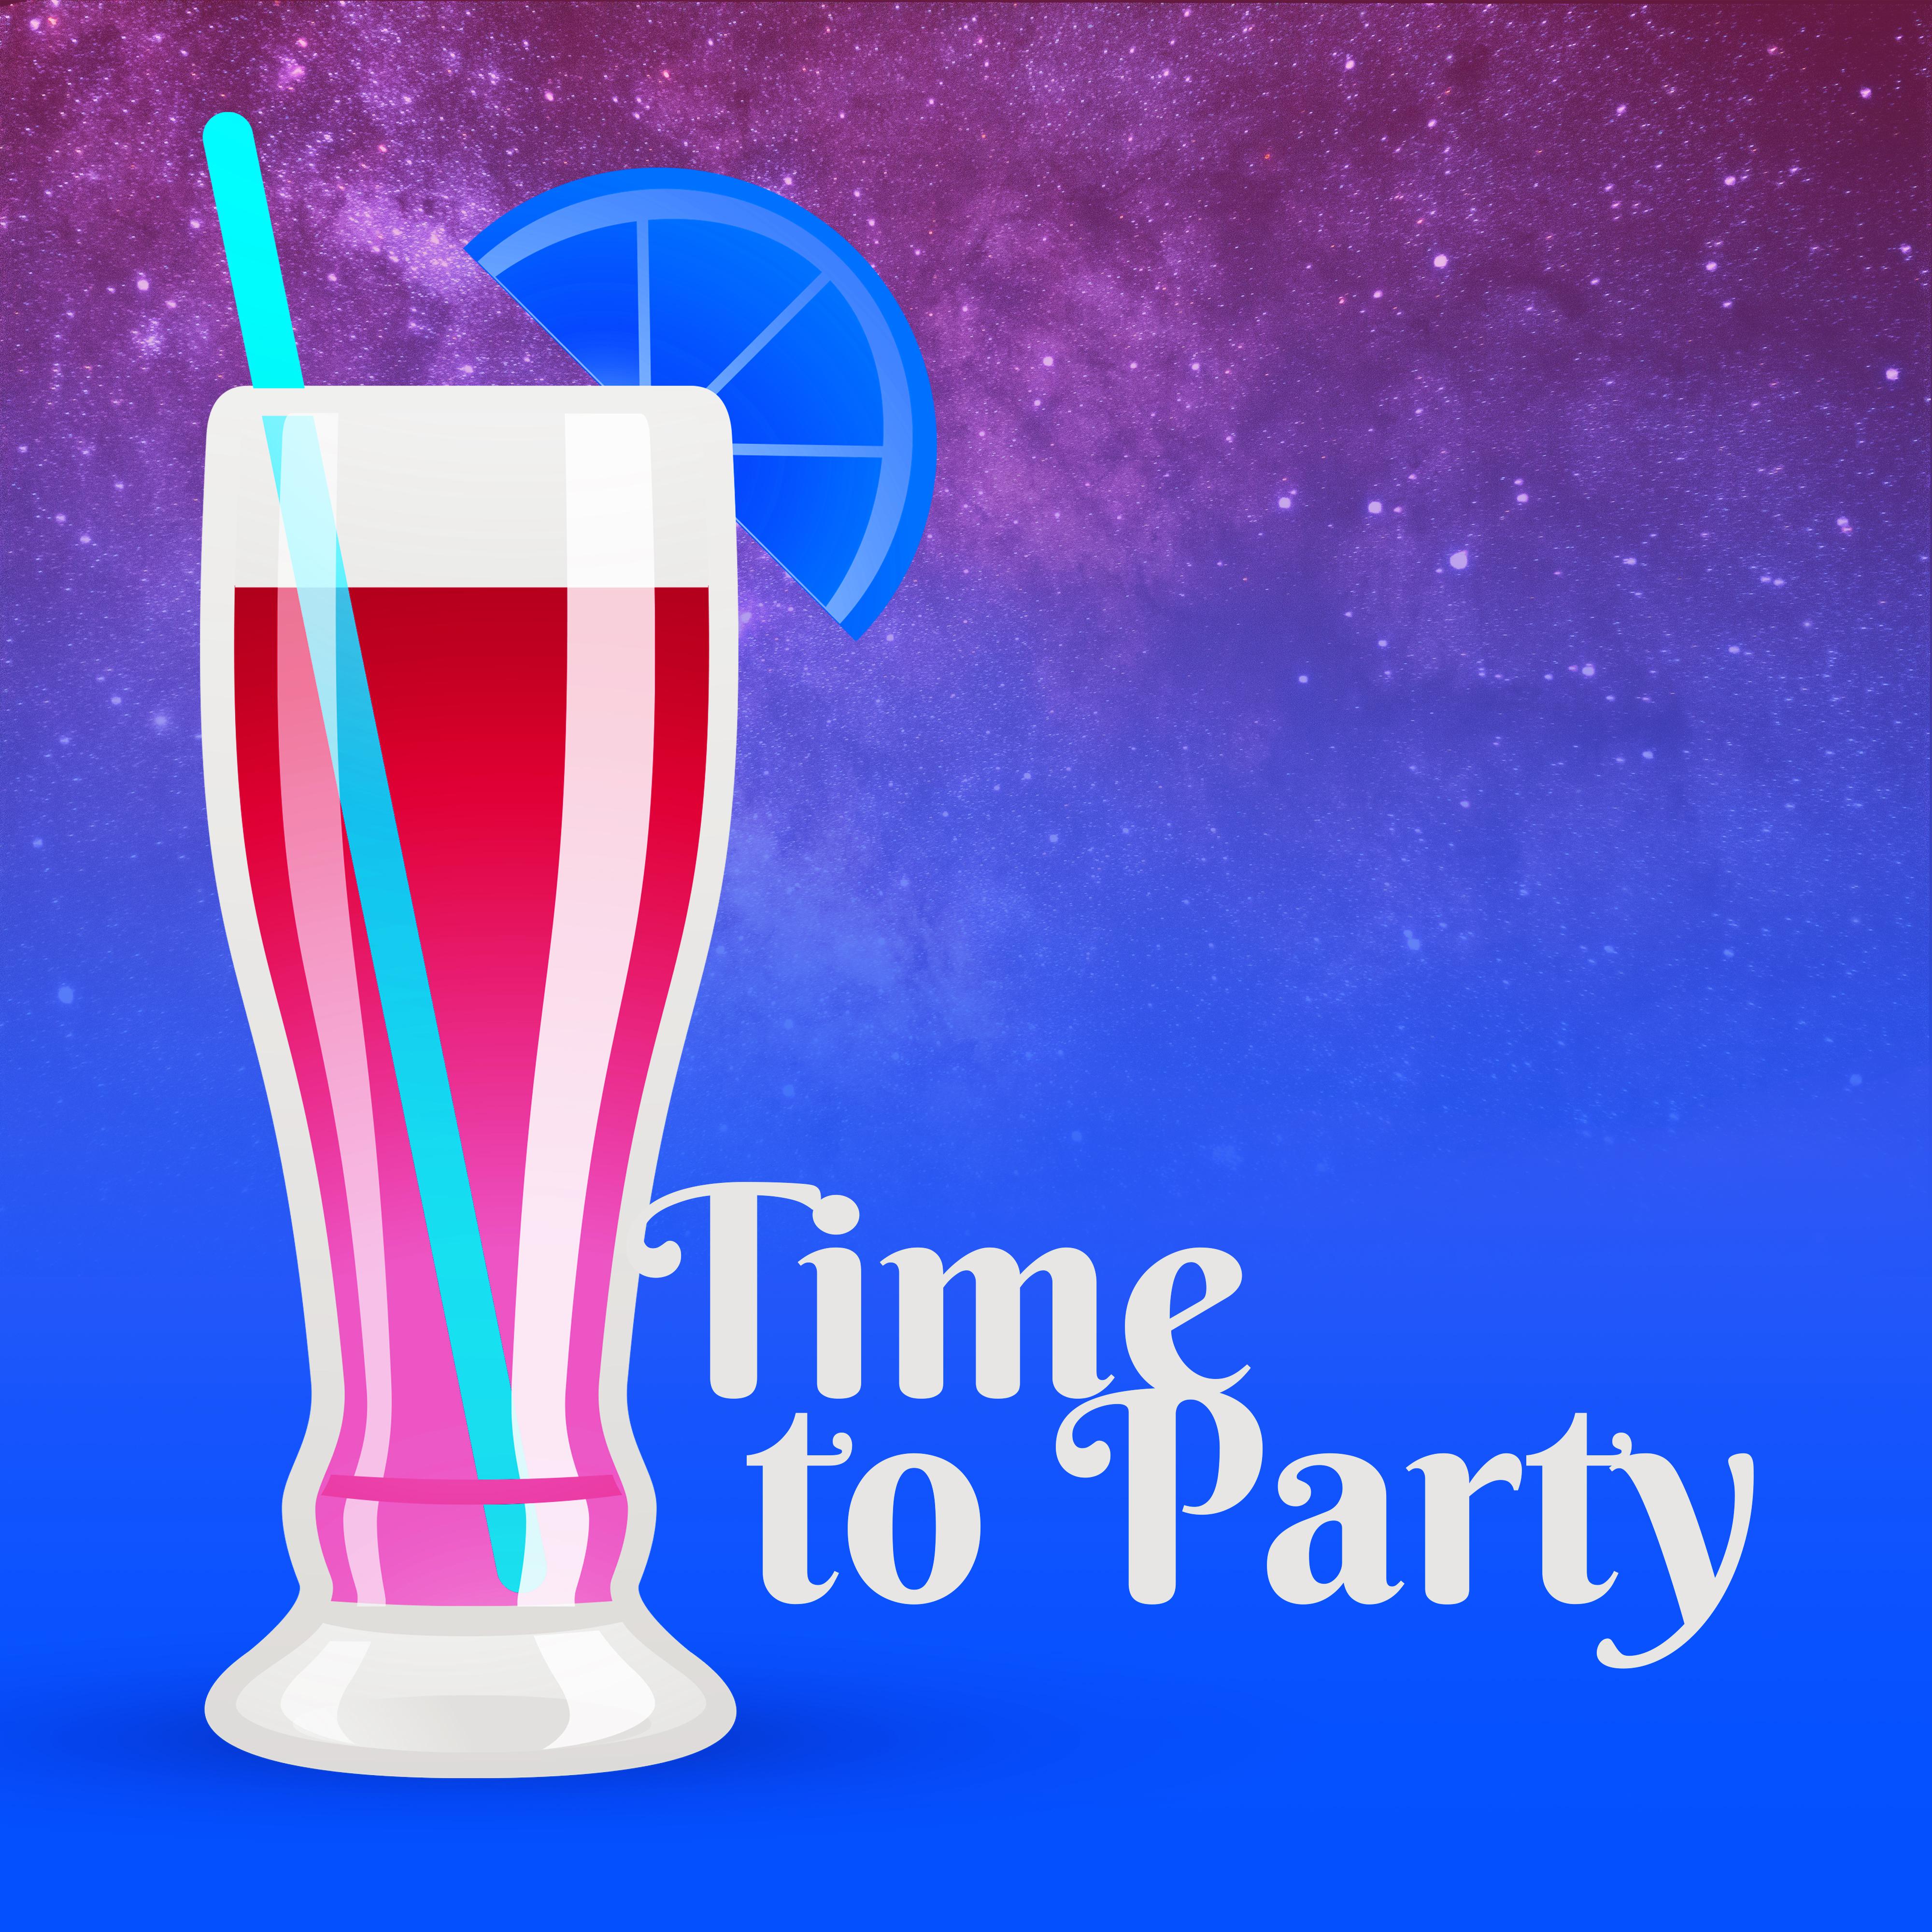 Time to Party – Party Night, Evening Sounds, **** Vibes, Erotic Dance, Hot Summer